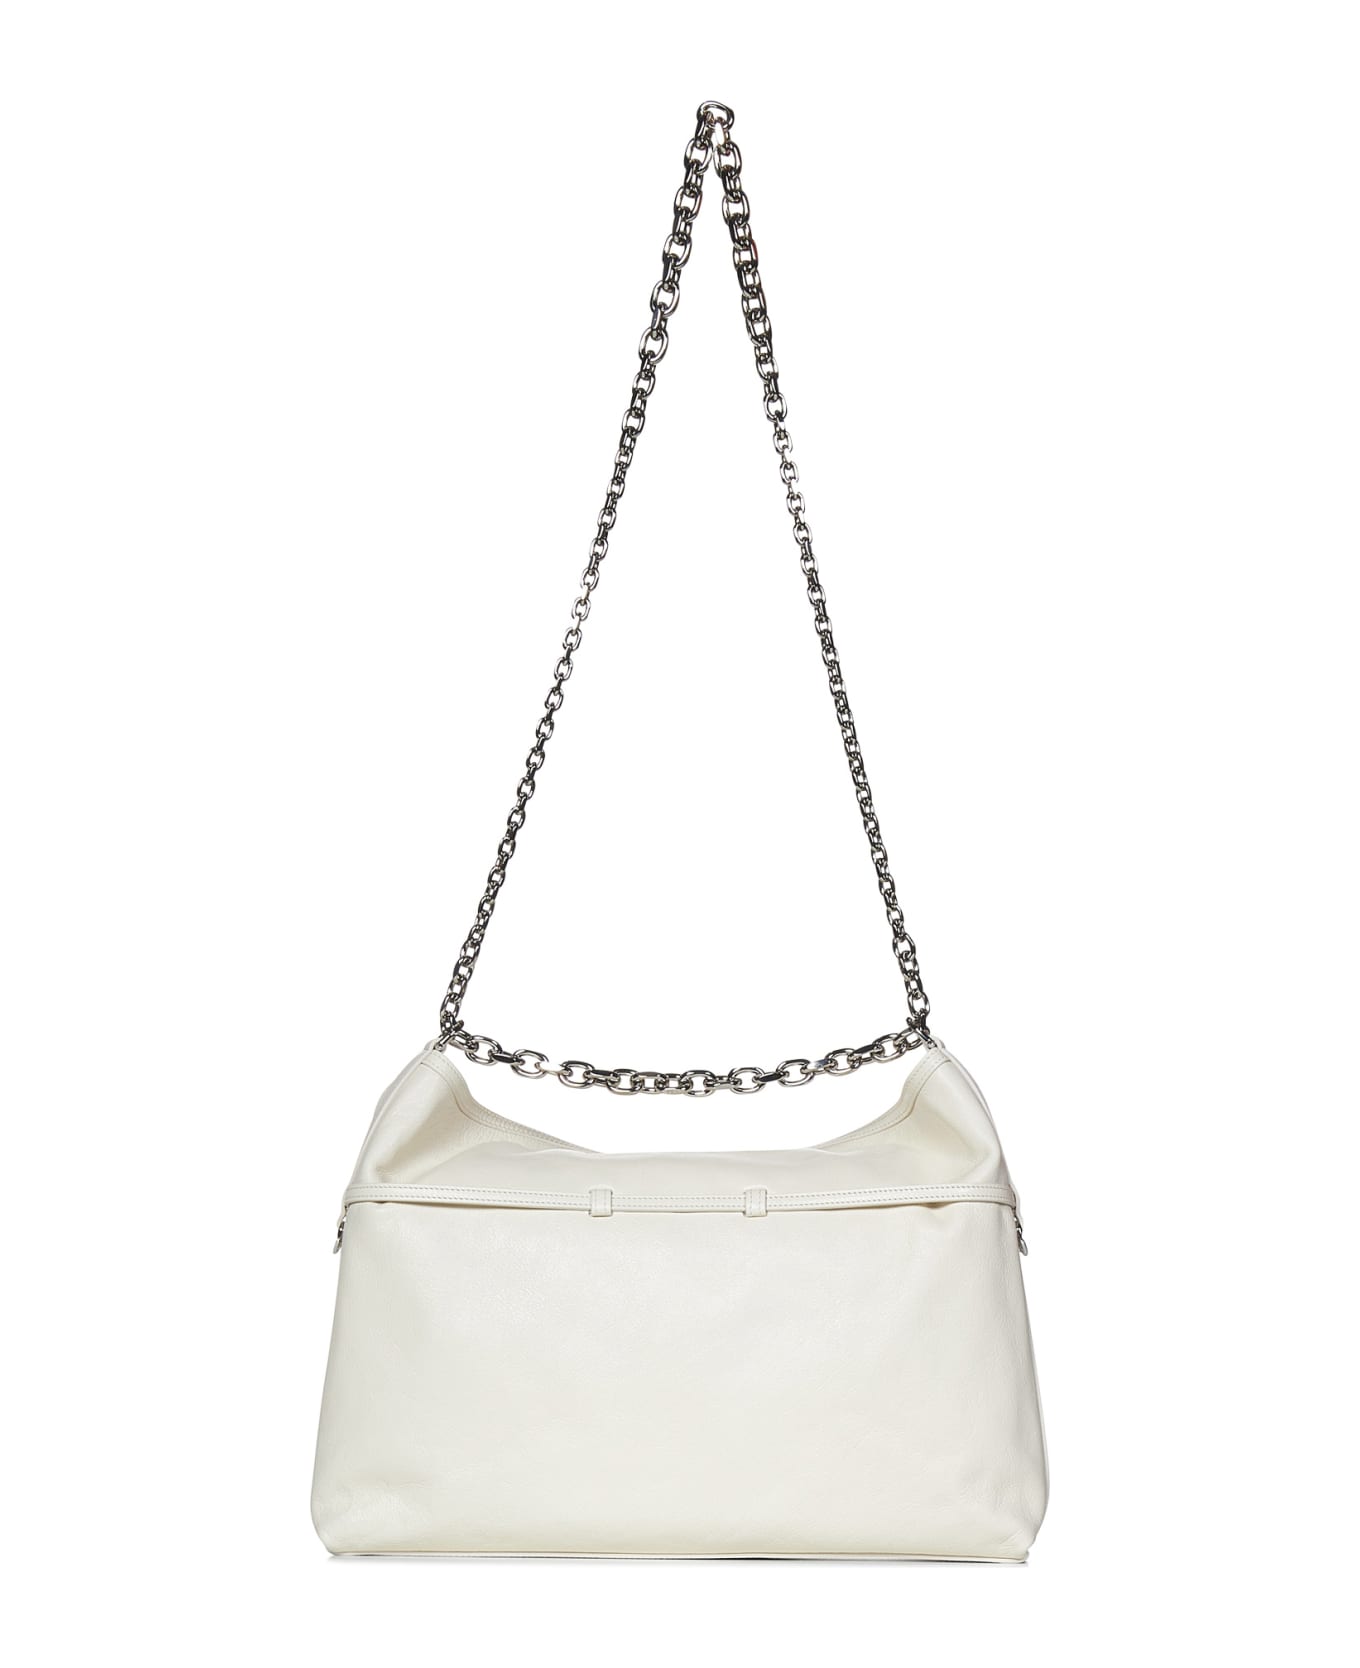 Givenchy Voyou Chain Shoulder Bag - White